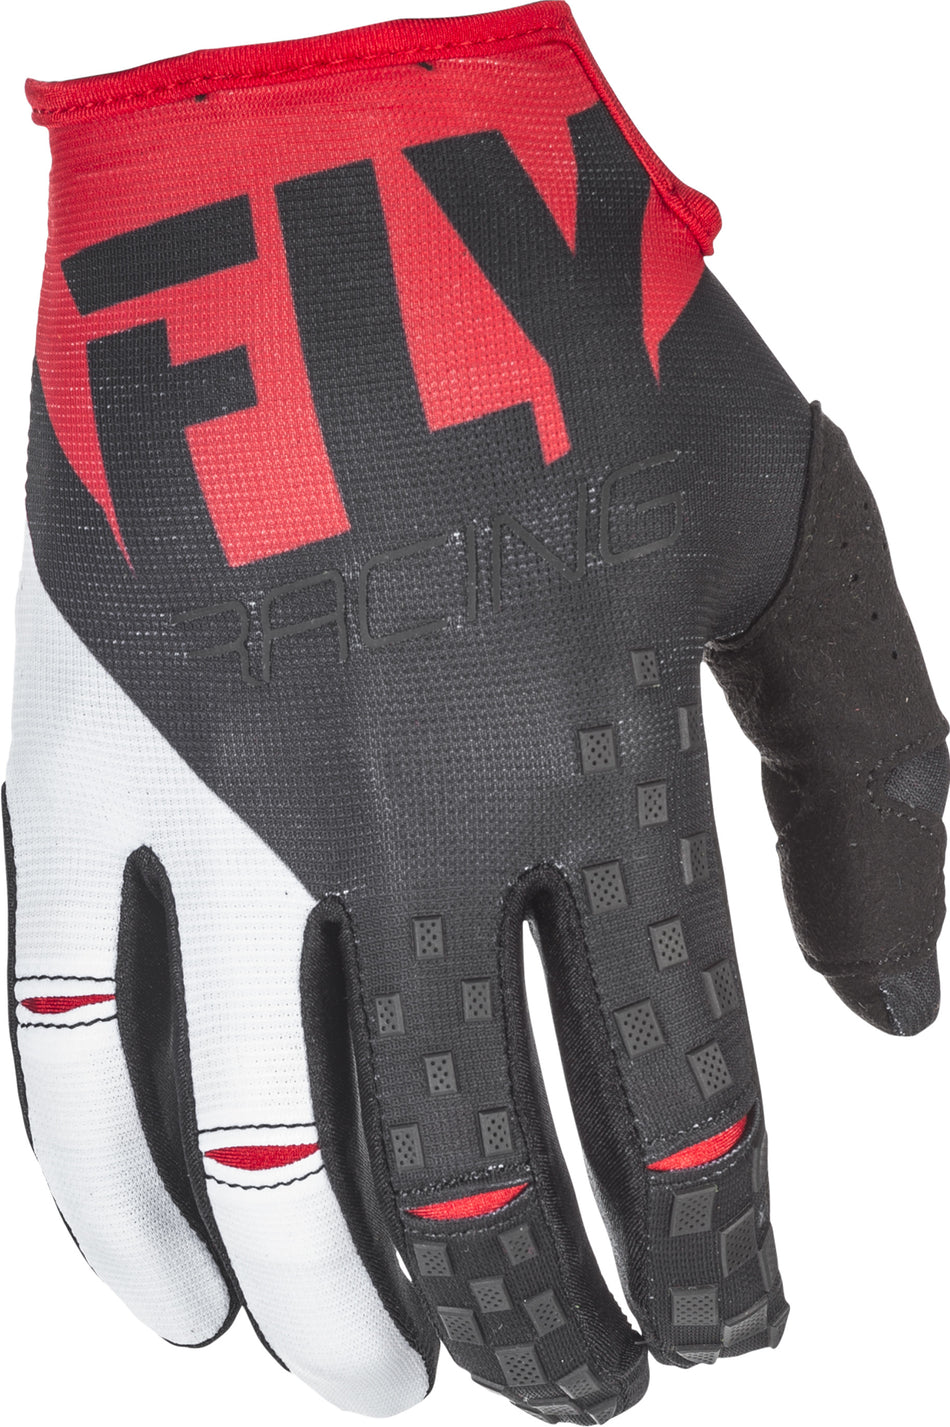 FLY RACING Kinetic Gloves Red/Black Sz 13 371-41213